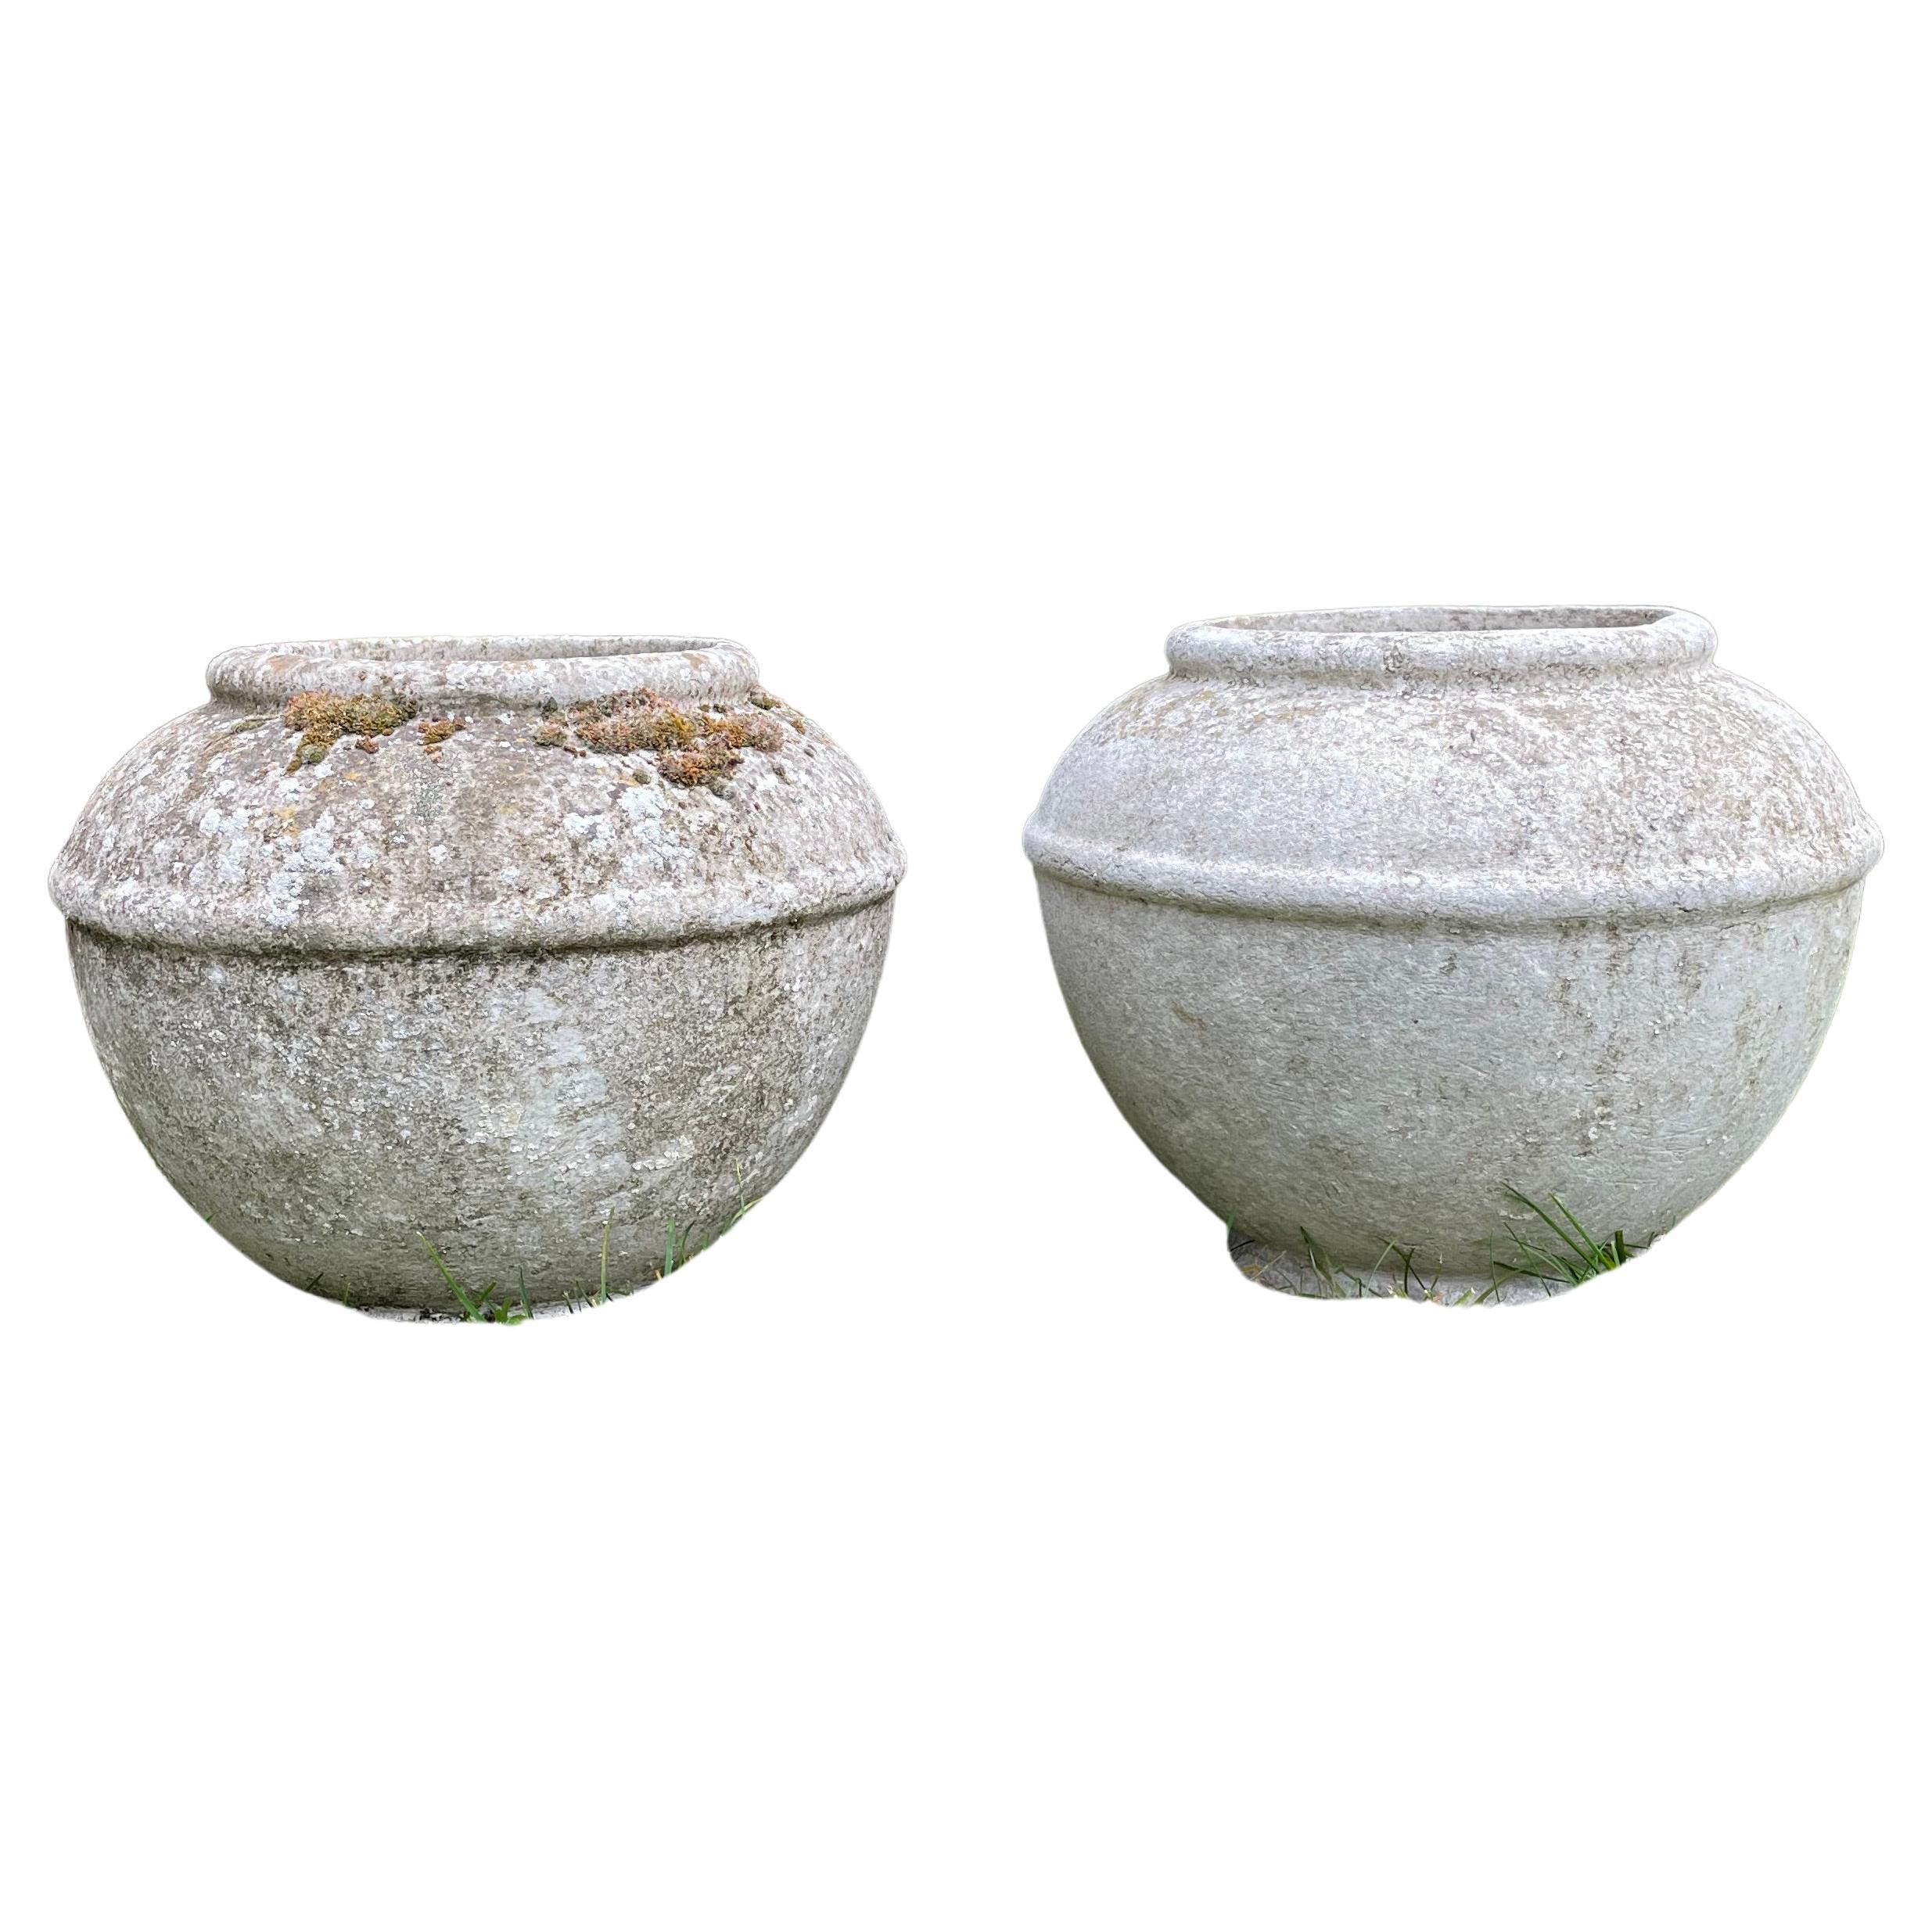 Pair of Lovely Round Willy Guhl Planters/Pots